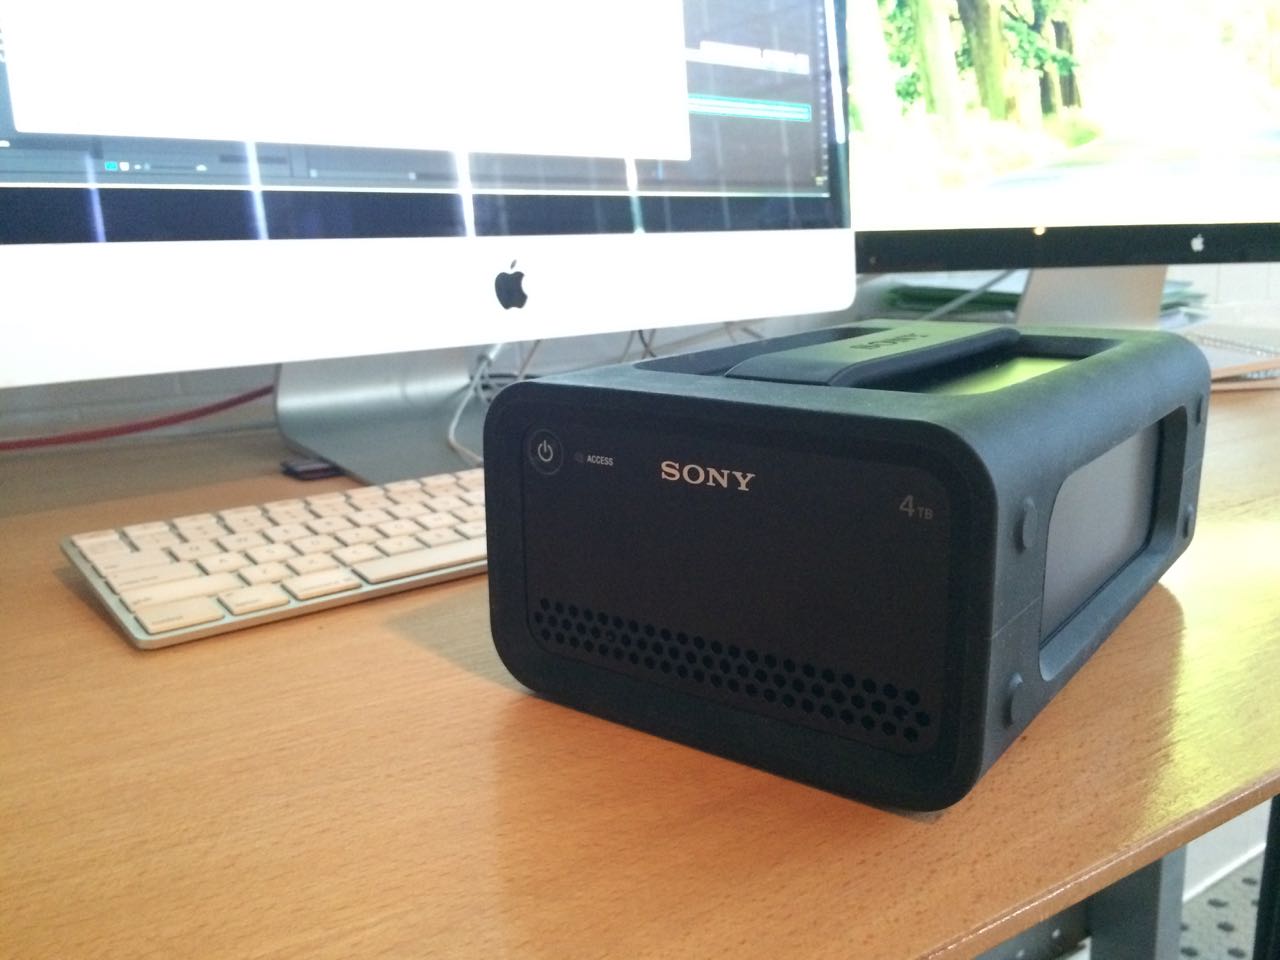 Review: Sony PSZ-RA4T hard drive - A very portable rugged RAID by